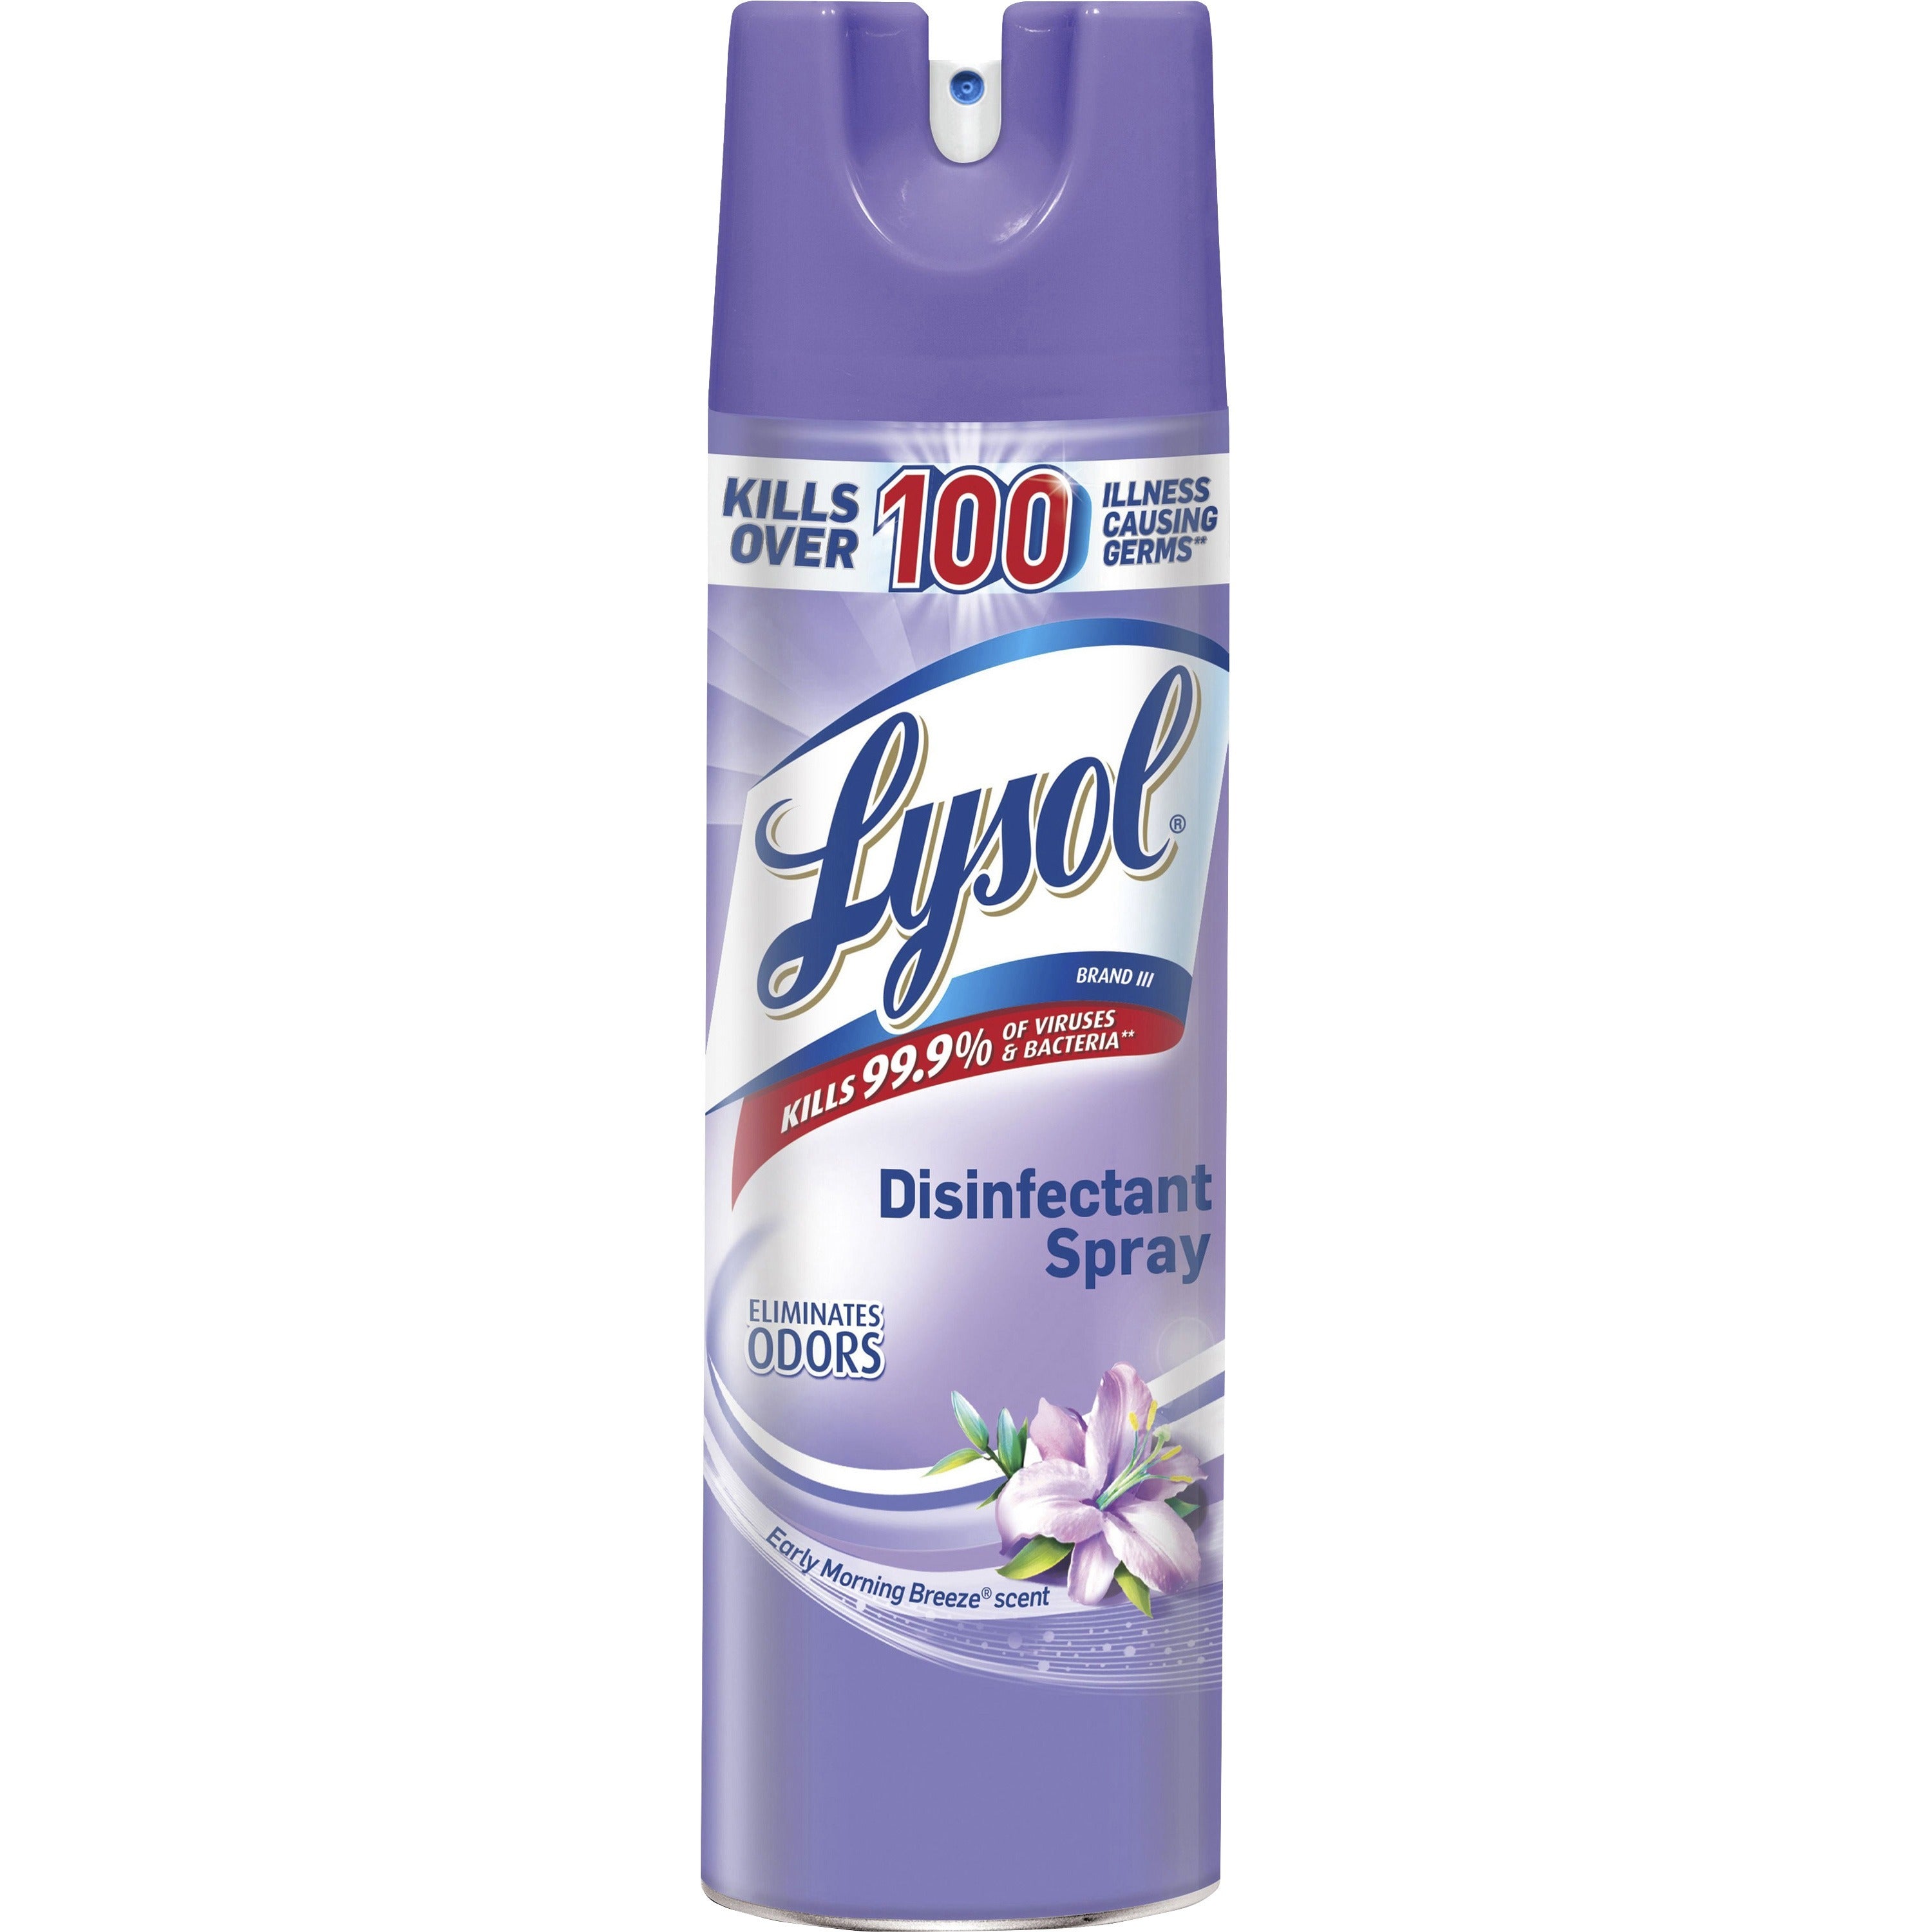 Lysol Early Morning Breeze Disinfectant Spray - For Multipurpose - 19 fl oz (0.6 quart) - Early Morning Breeze Scent - 12 / Carton - Anti-bacterial, Deodorize - Clear - 